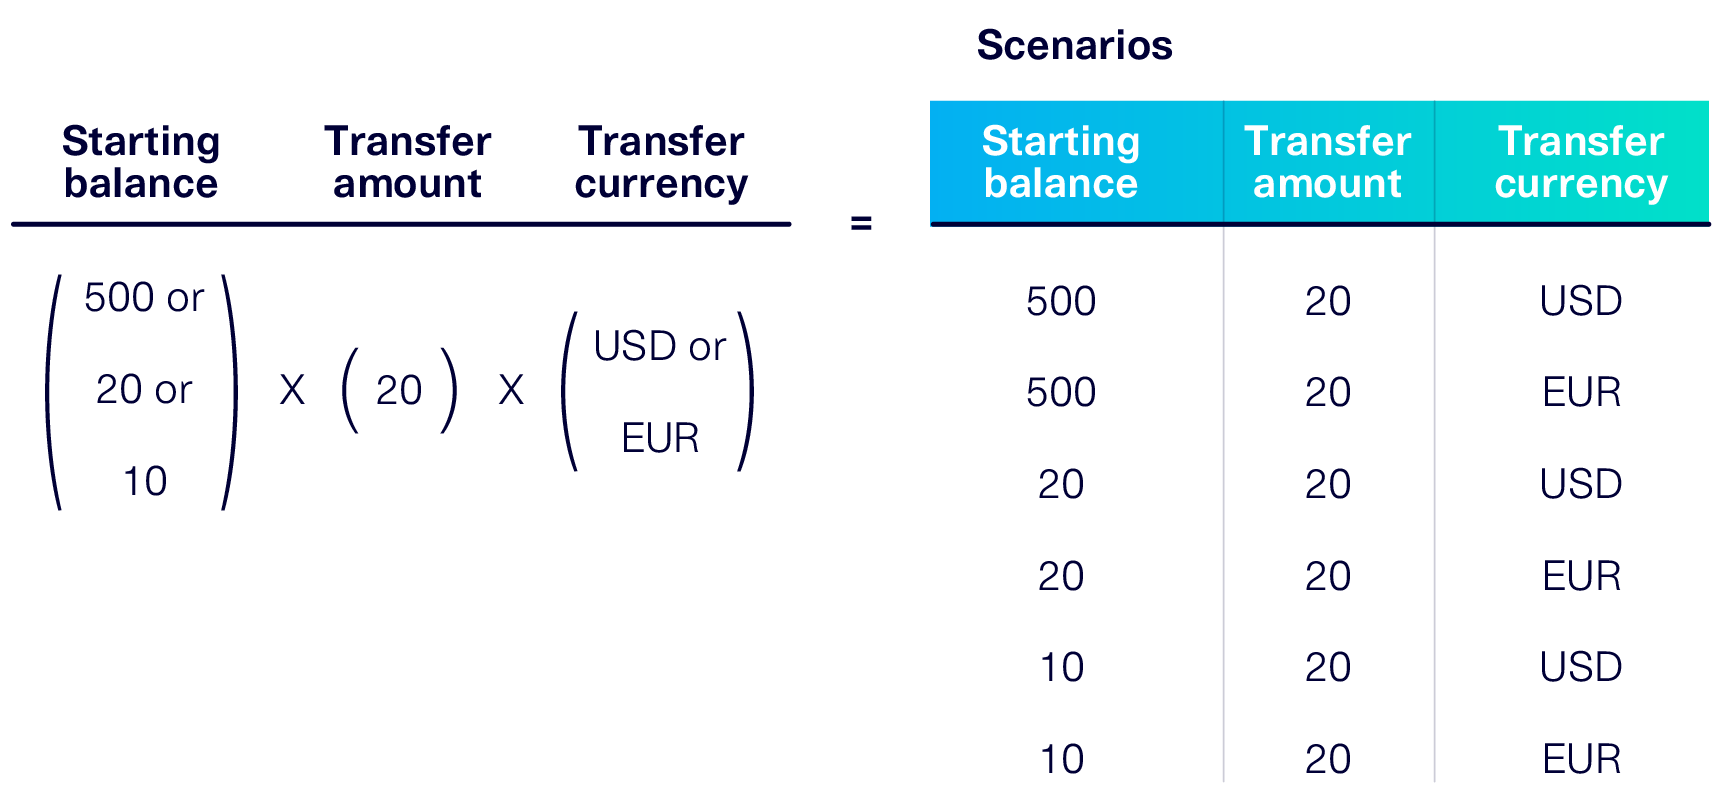 A simple manual test data generation tool that uses permutations. The resulting scenarios -- with different starting balances, transfer amounts and transfer currencies -- are outputted as a data table.